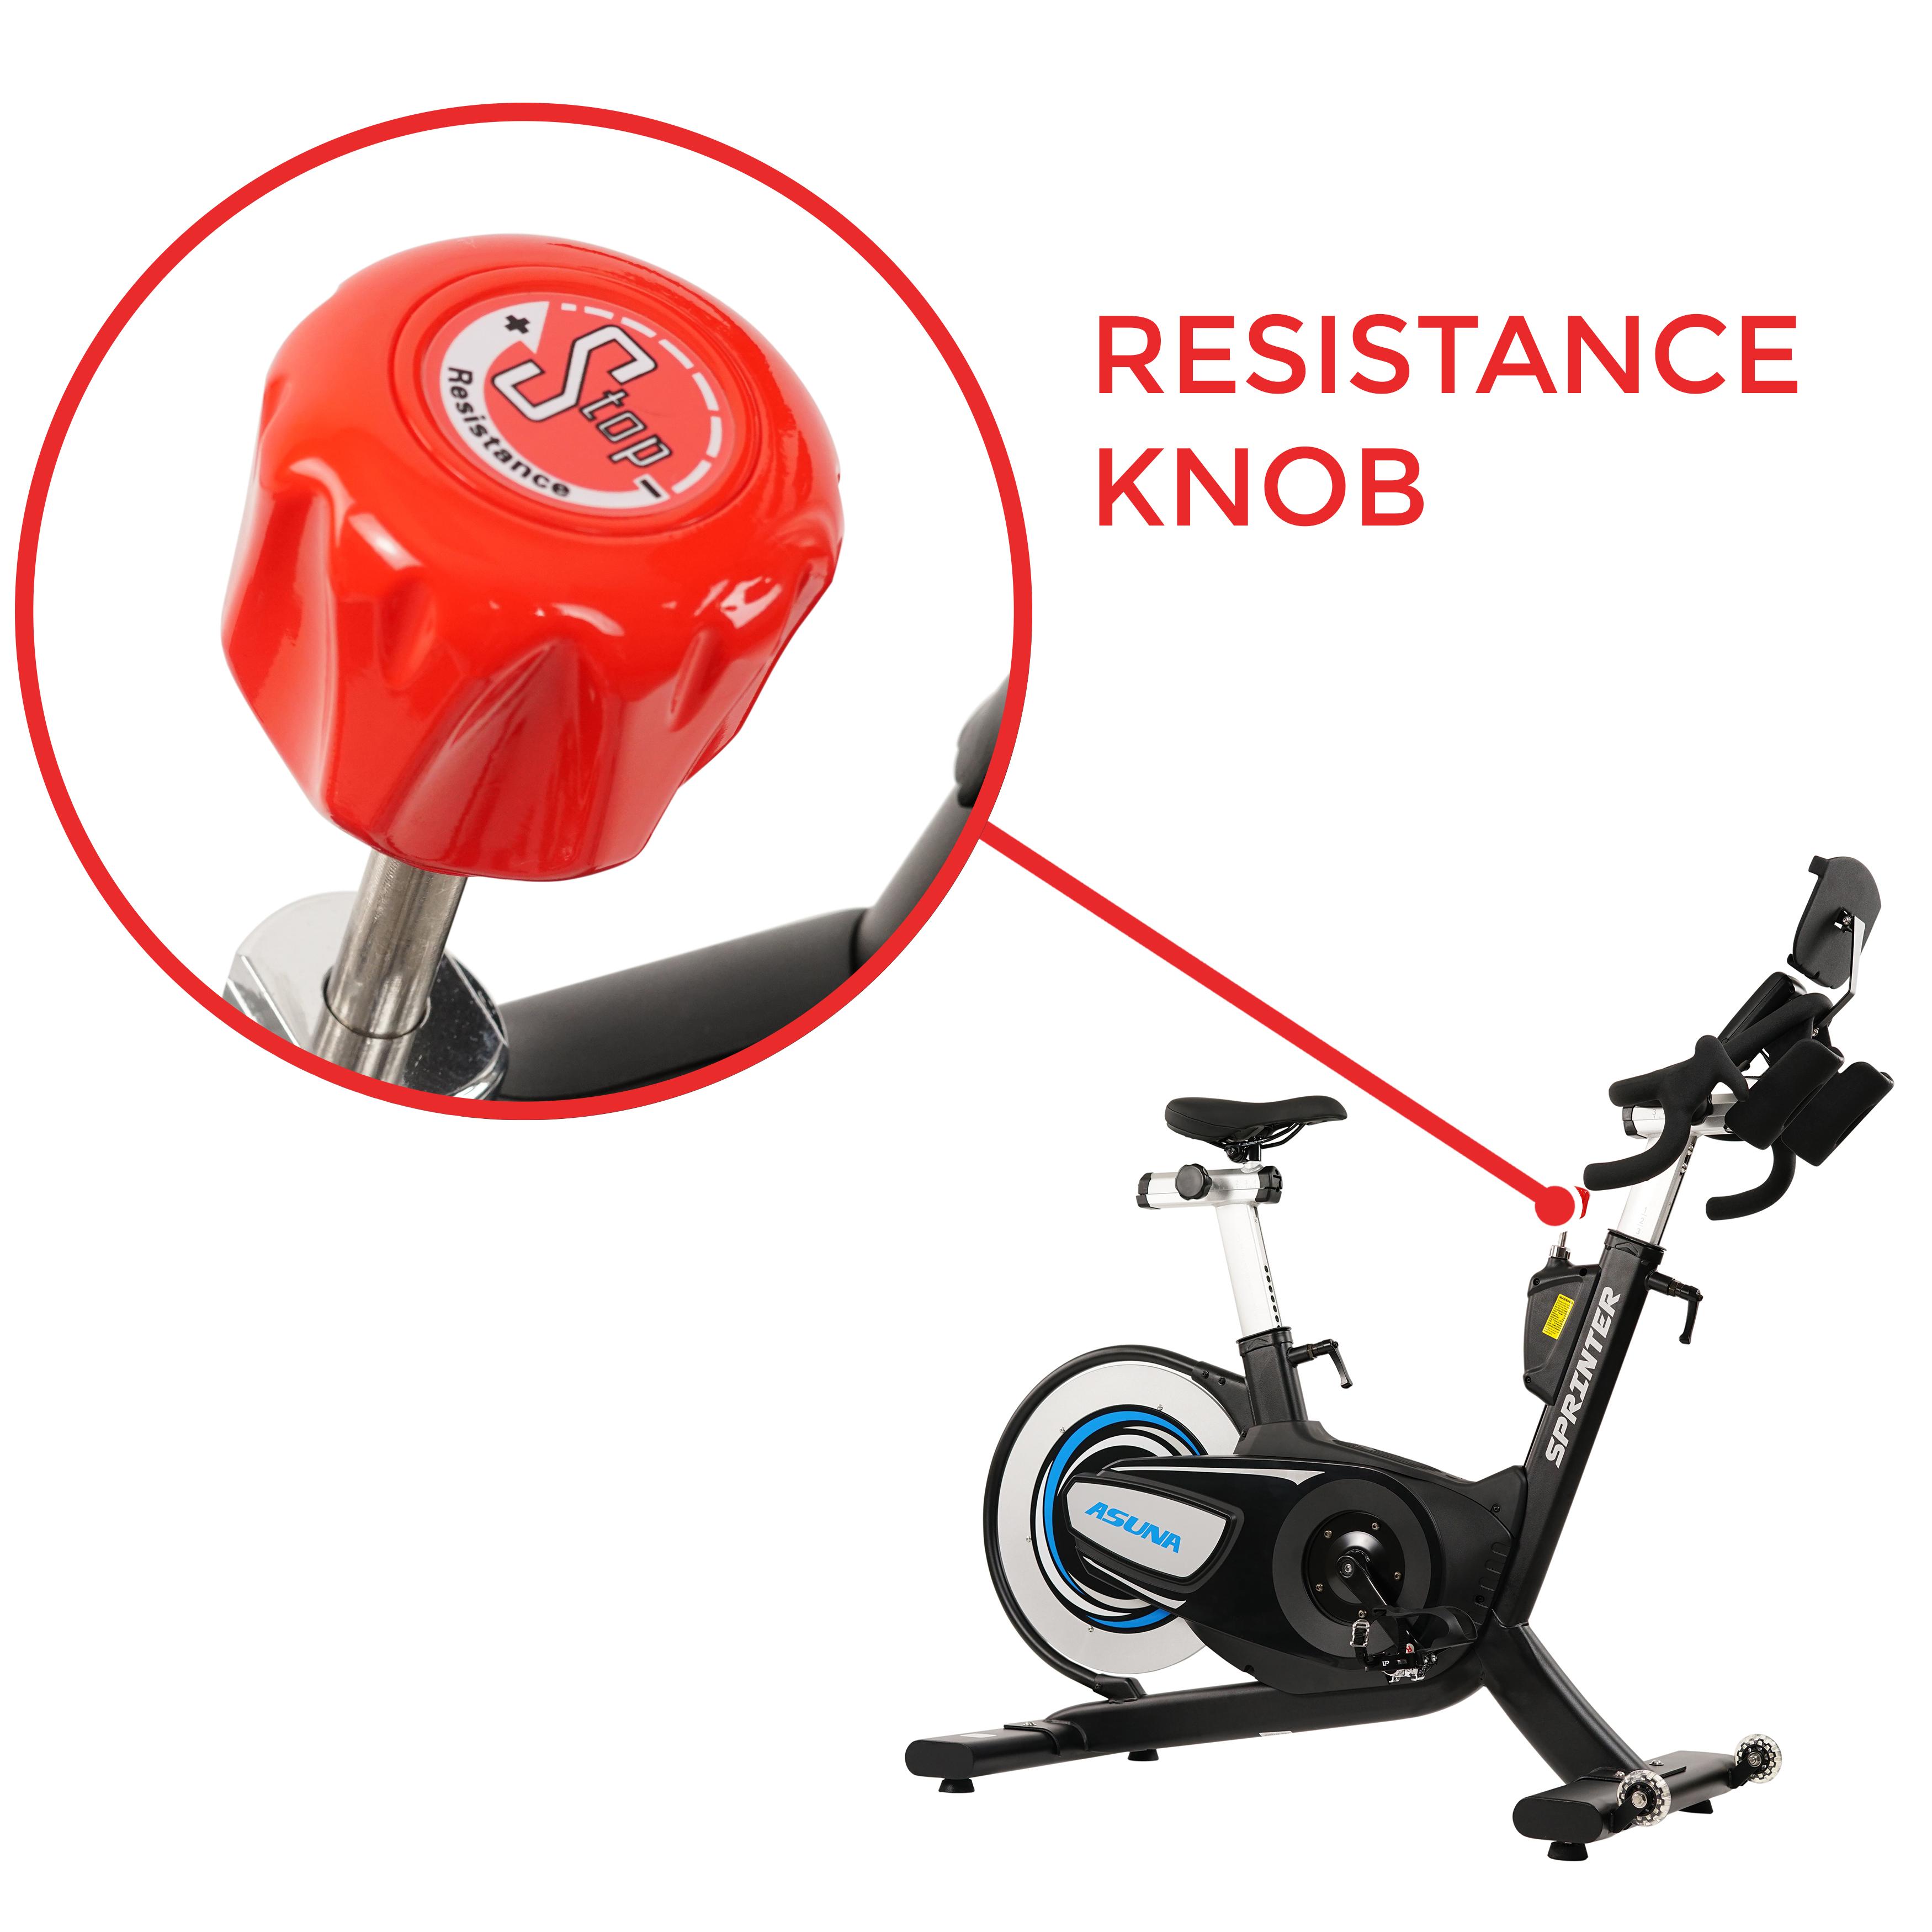 Detail view of a red resistance knob on a black exercise bike.